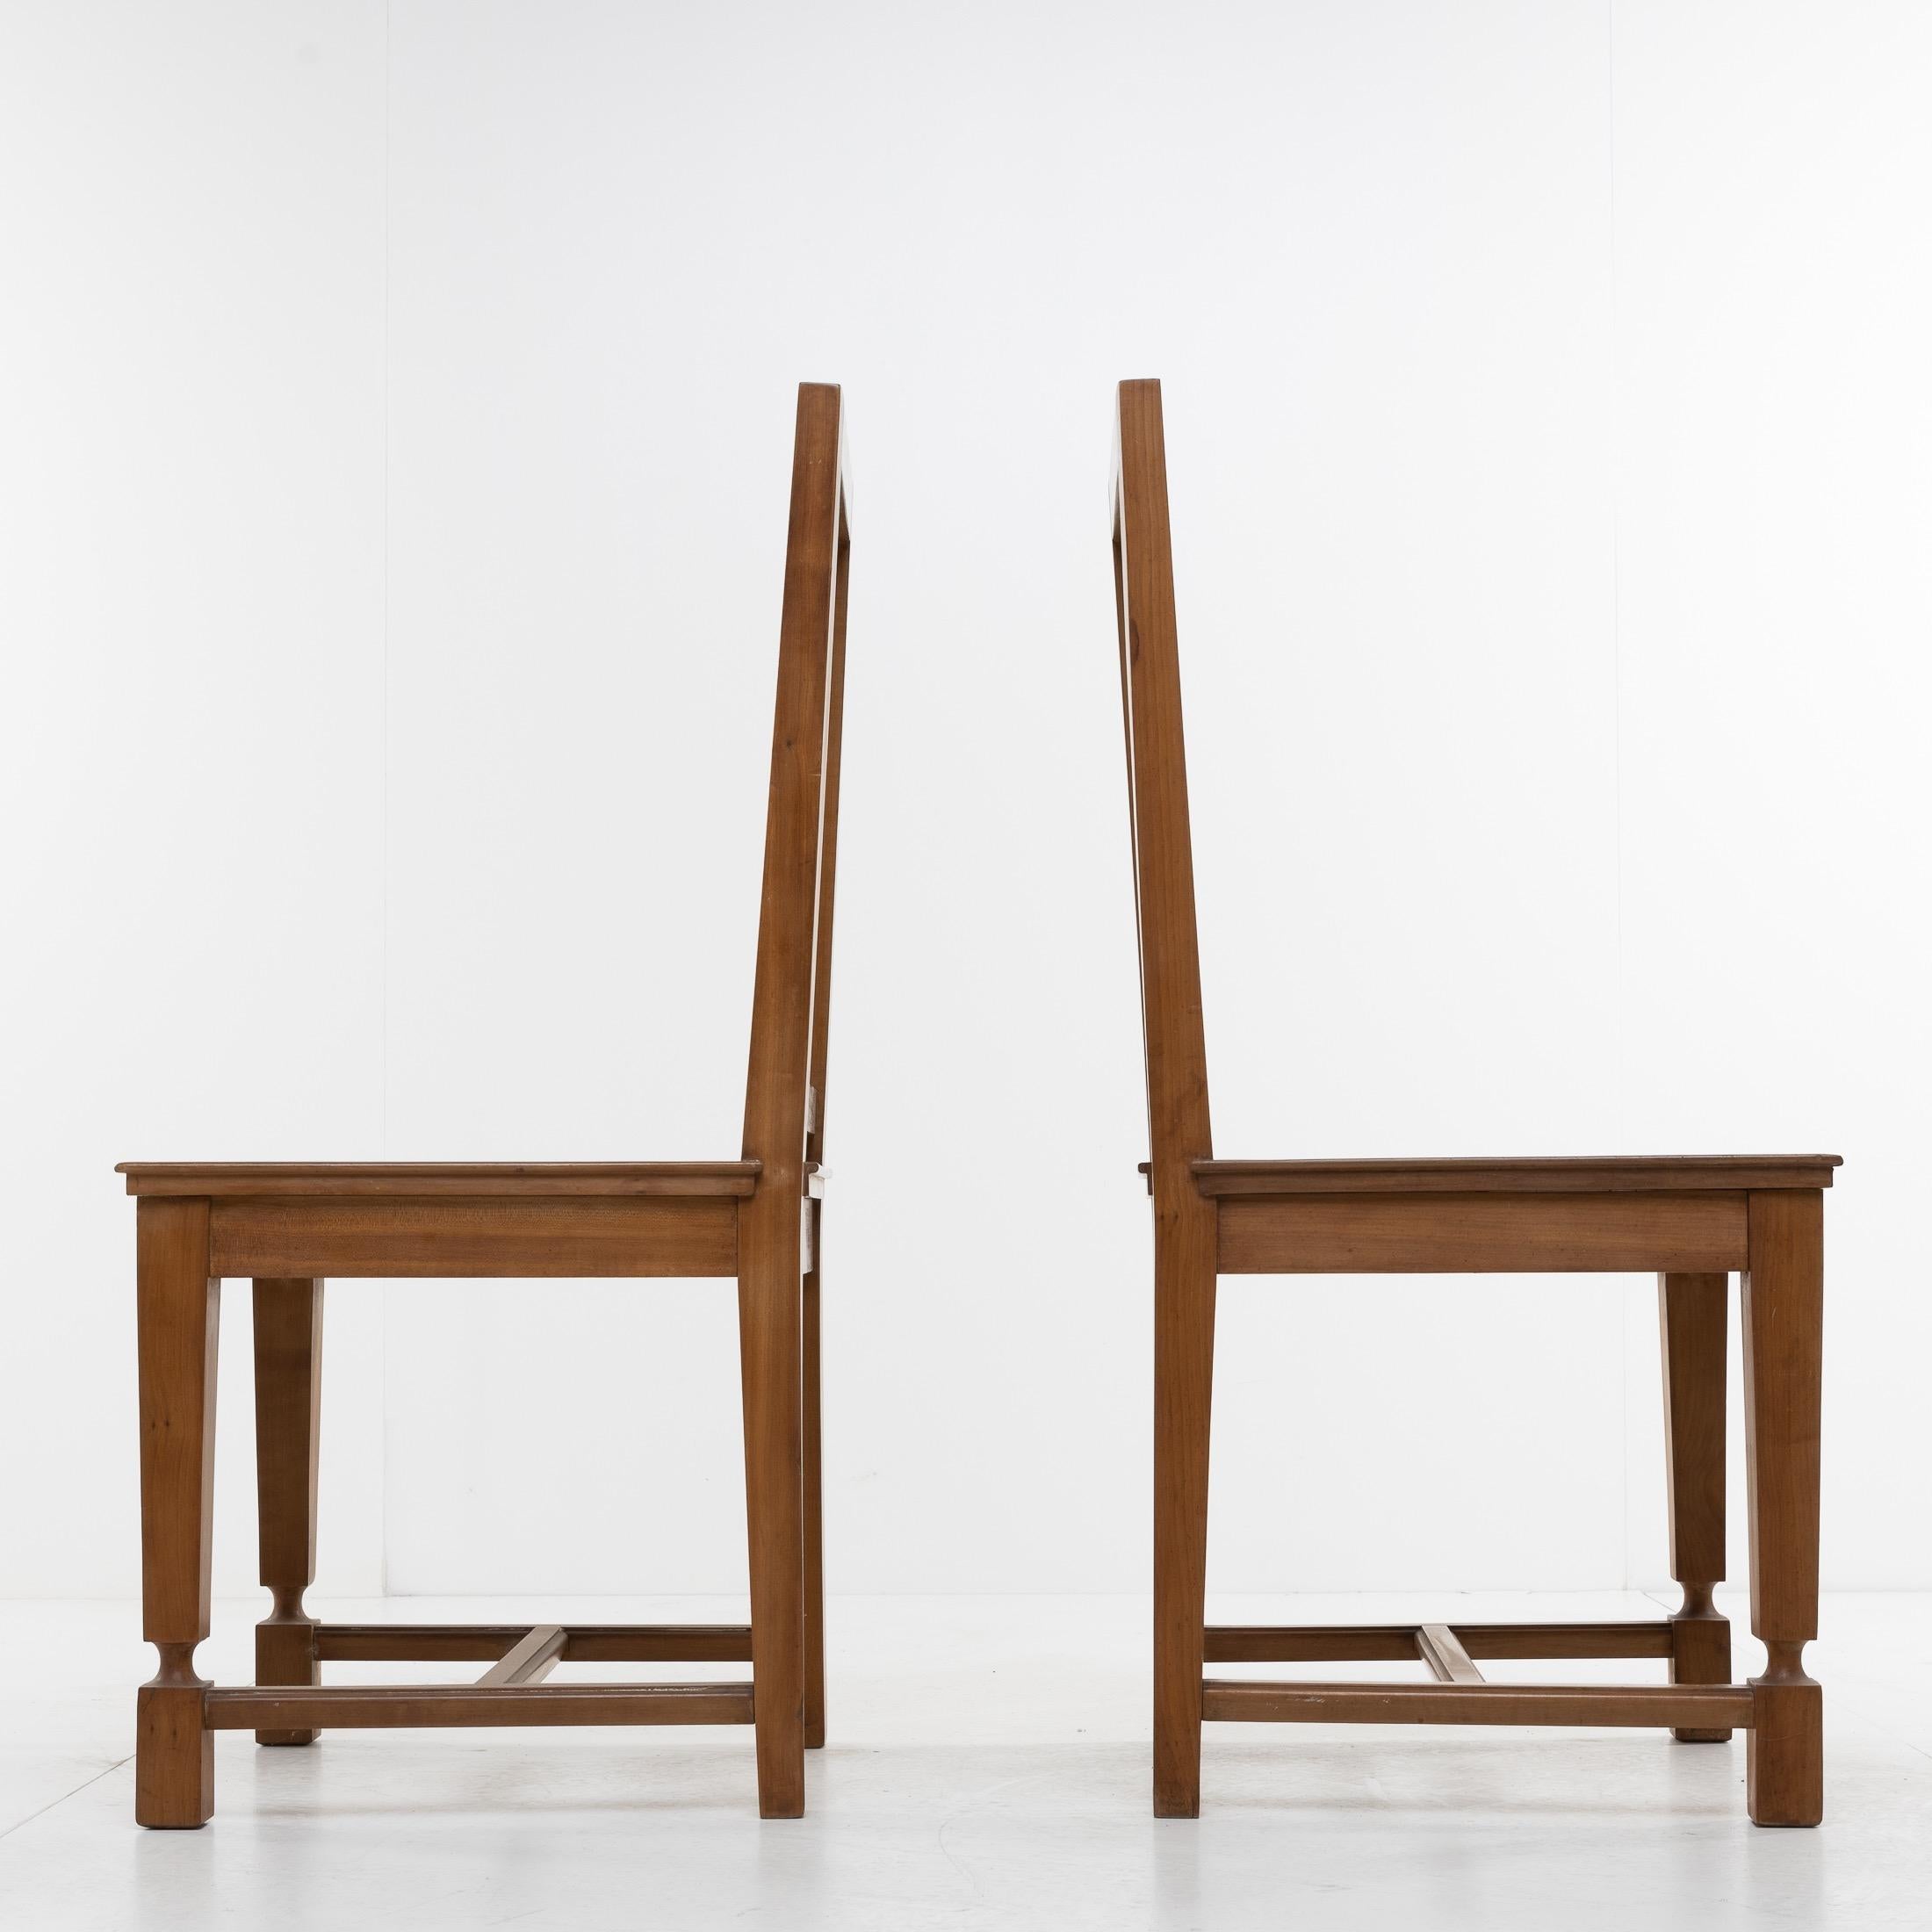 French André Arbus, France, an Elegant Set of 4 Cherrywood Chairs